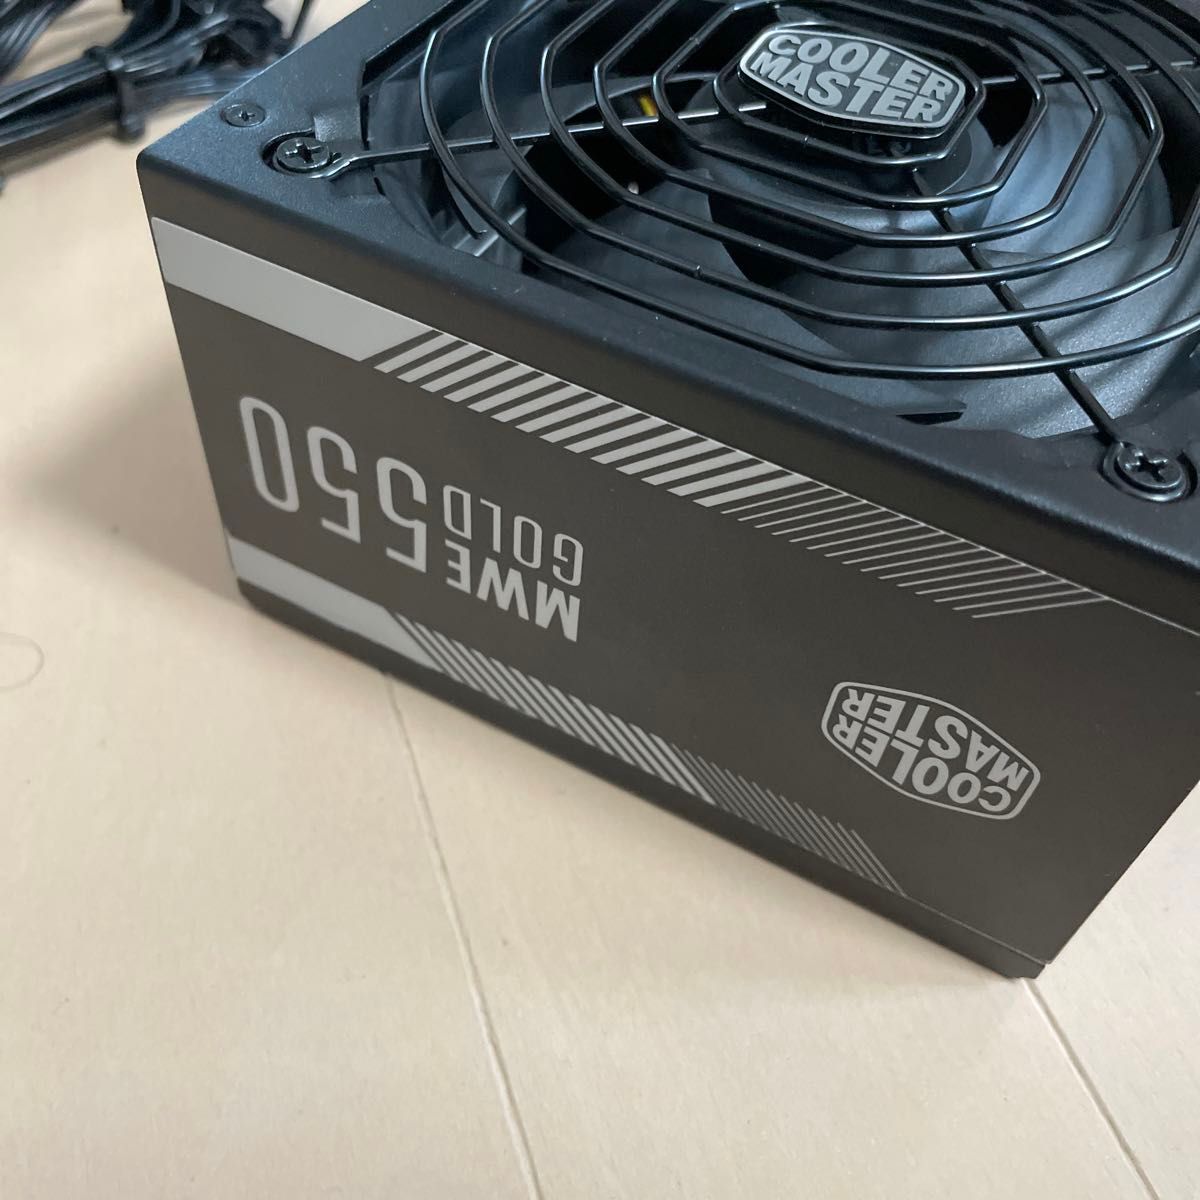 cooler master  ATX電源 550W GOLD ジャンク☆